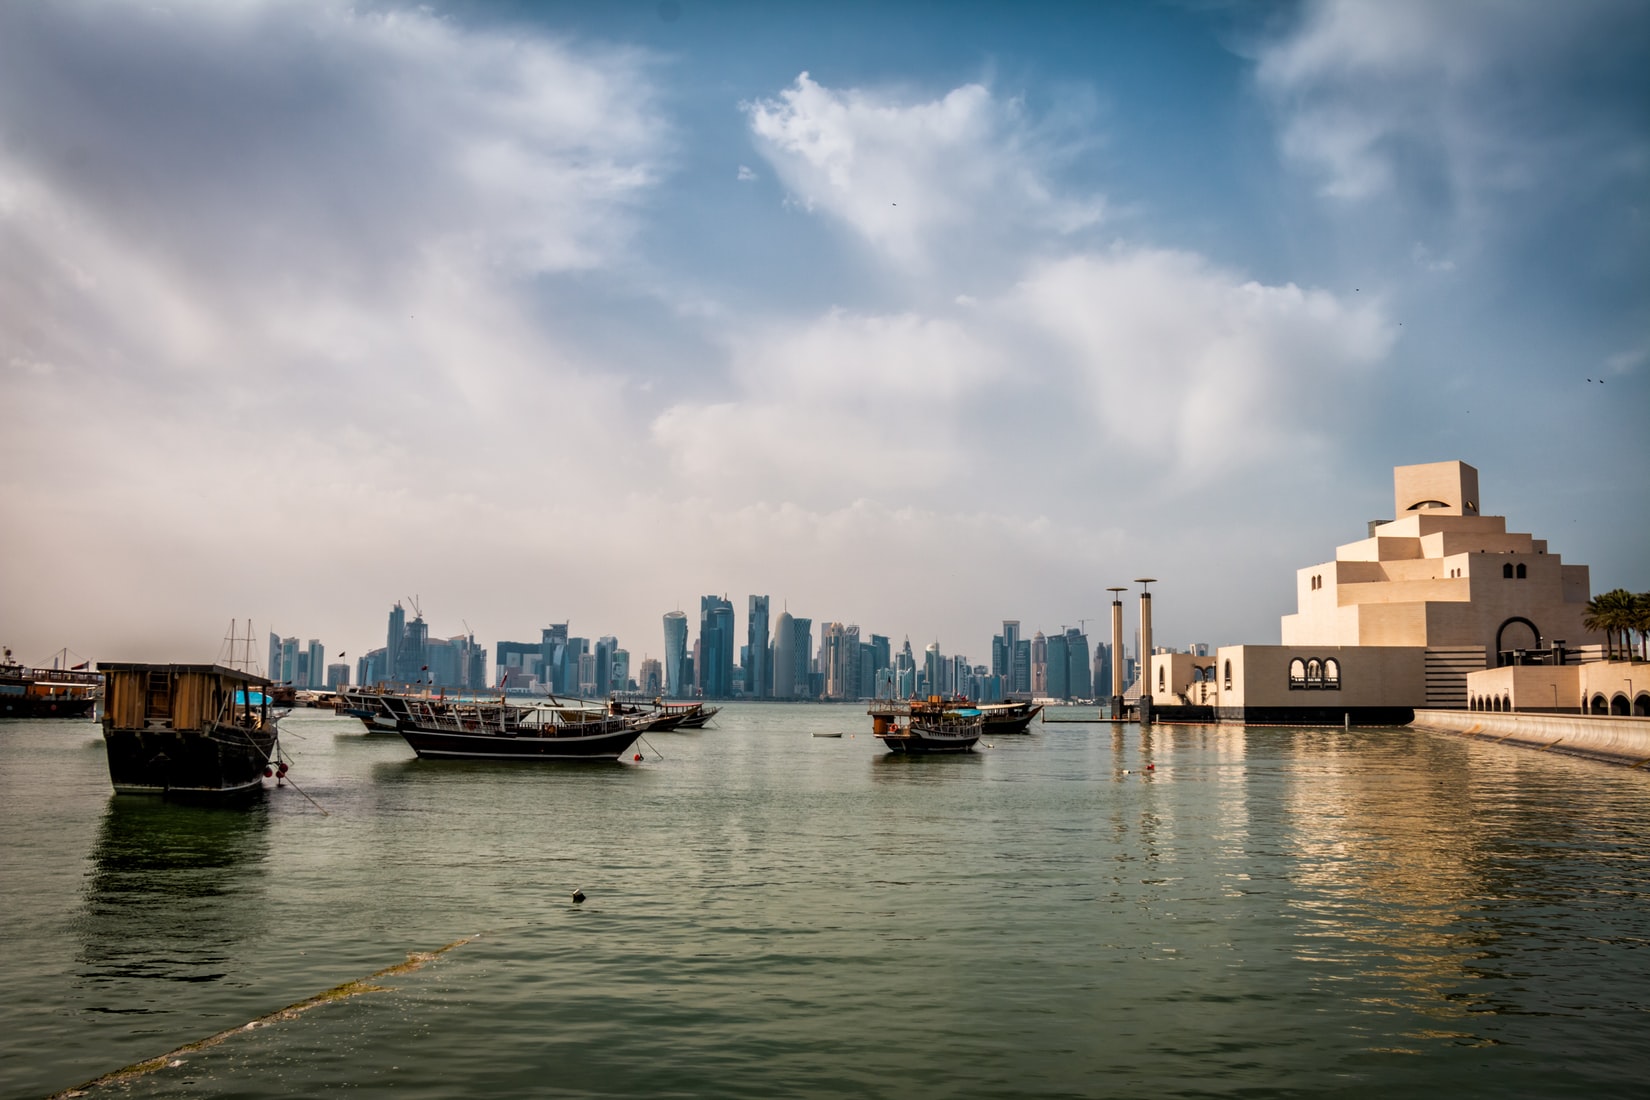 Image of Qatar - boats on water